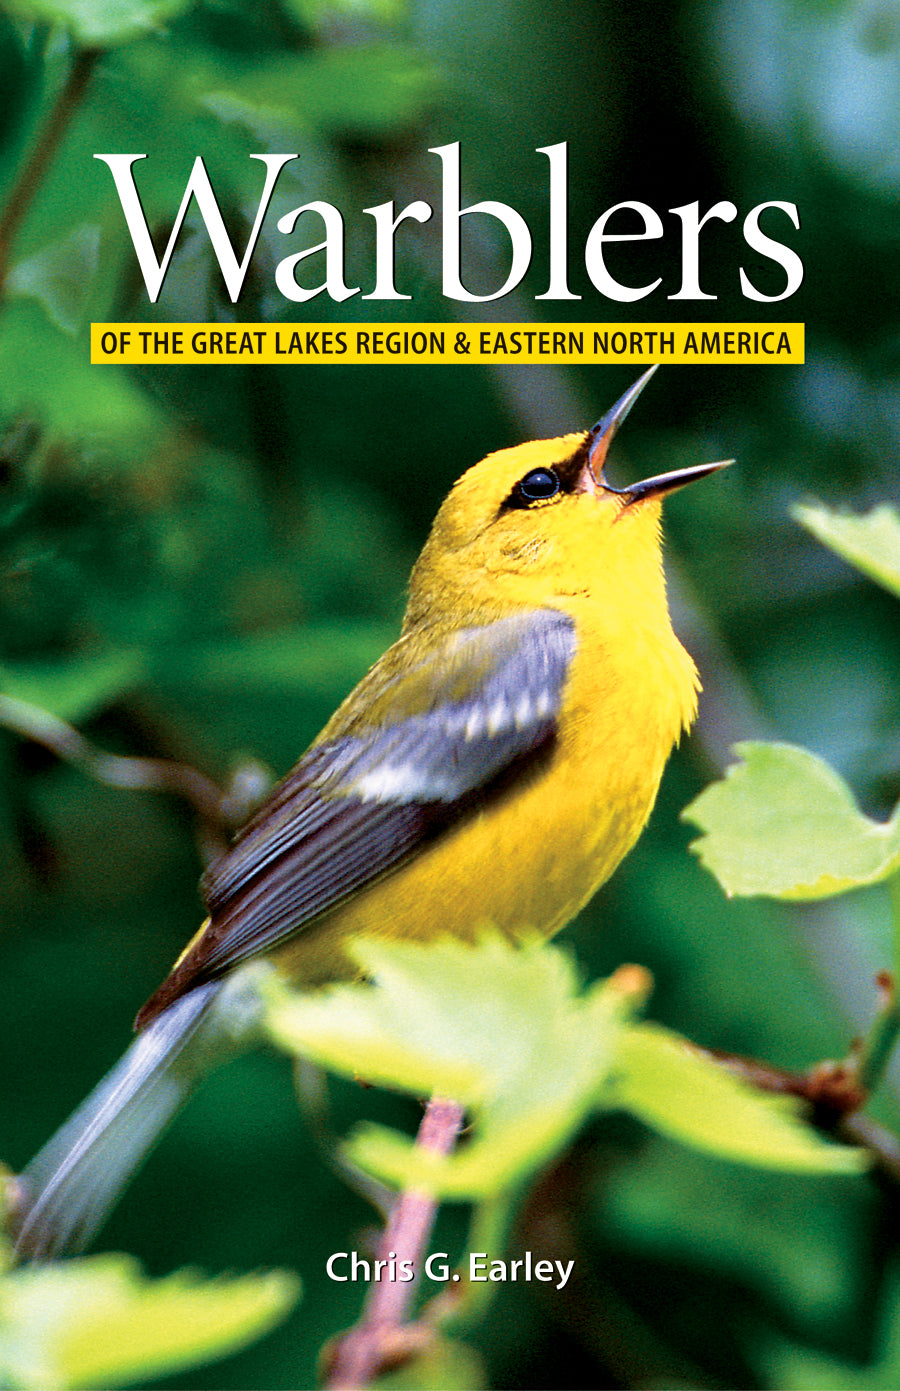 Warblers of the Great Lakes Region and Eastern Nor